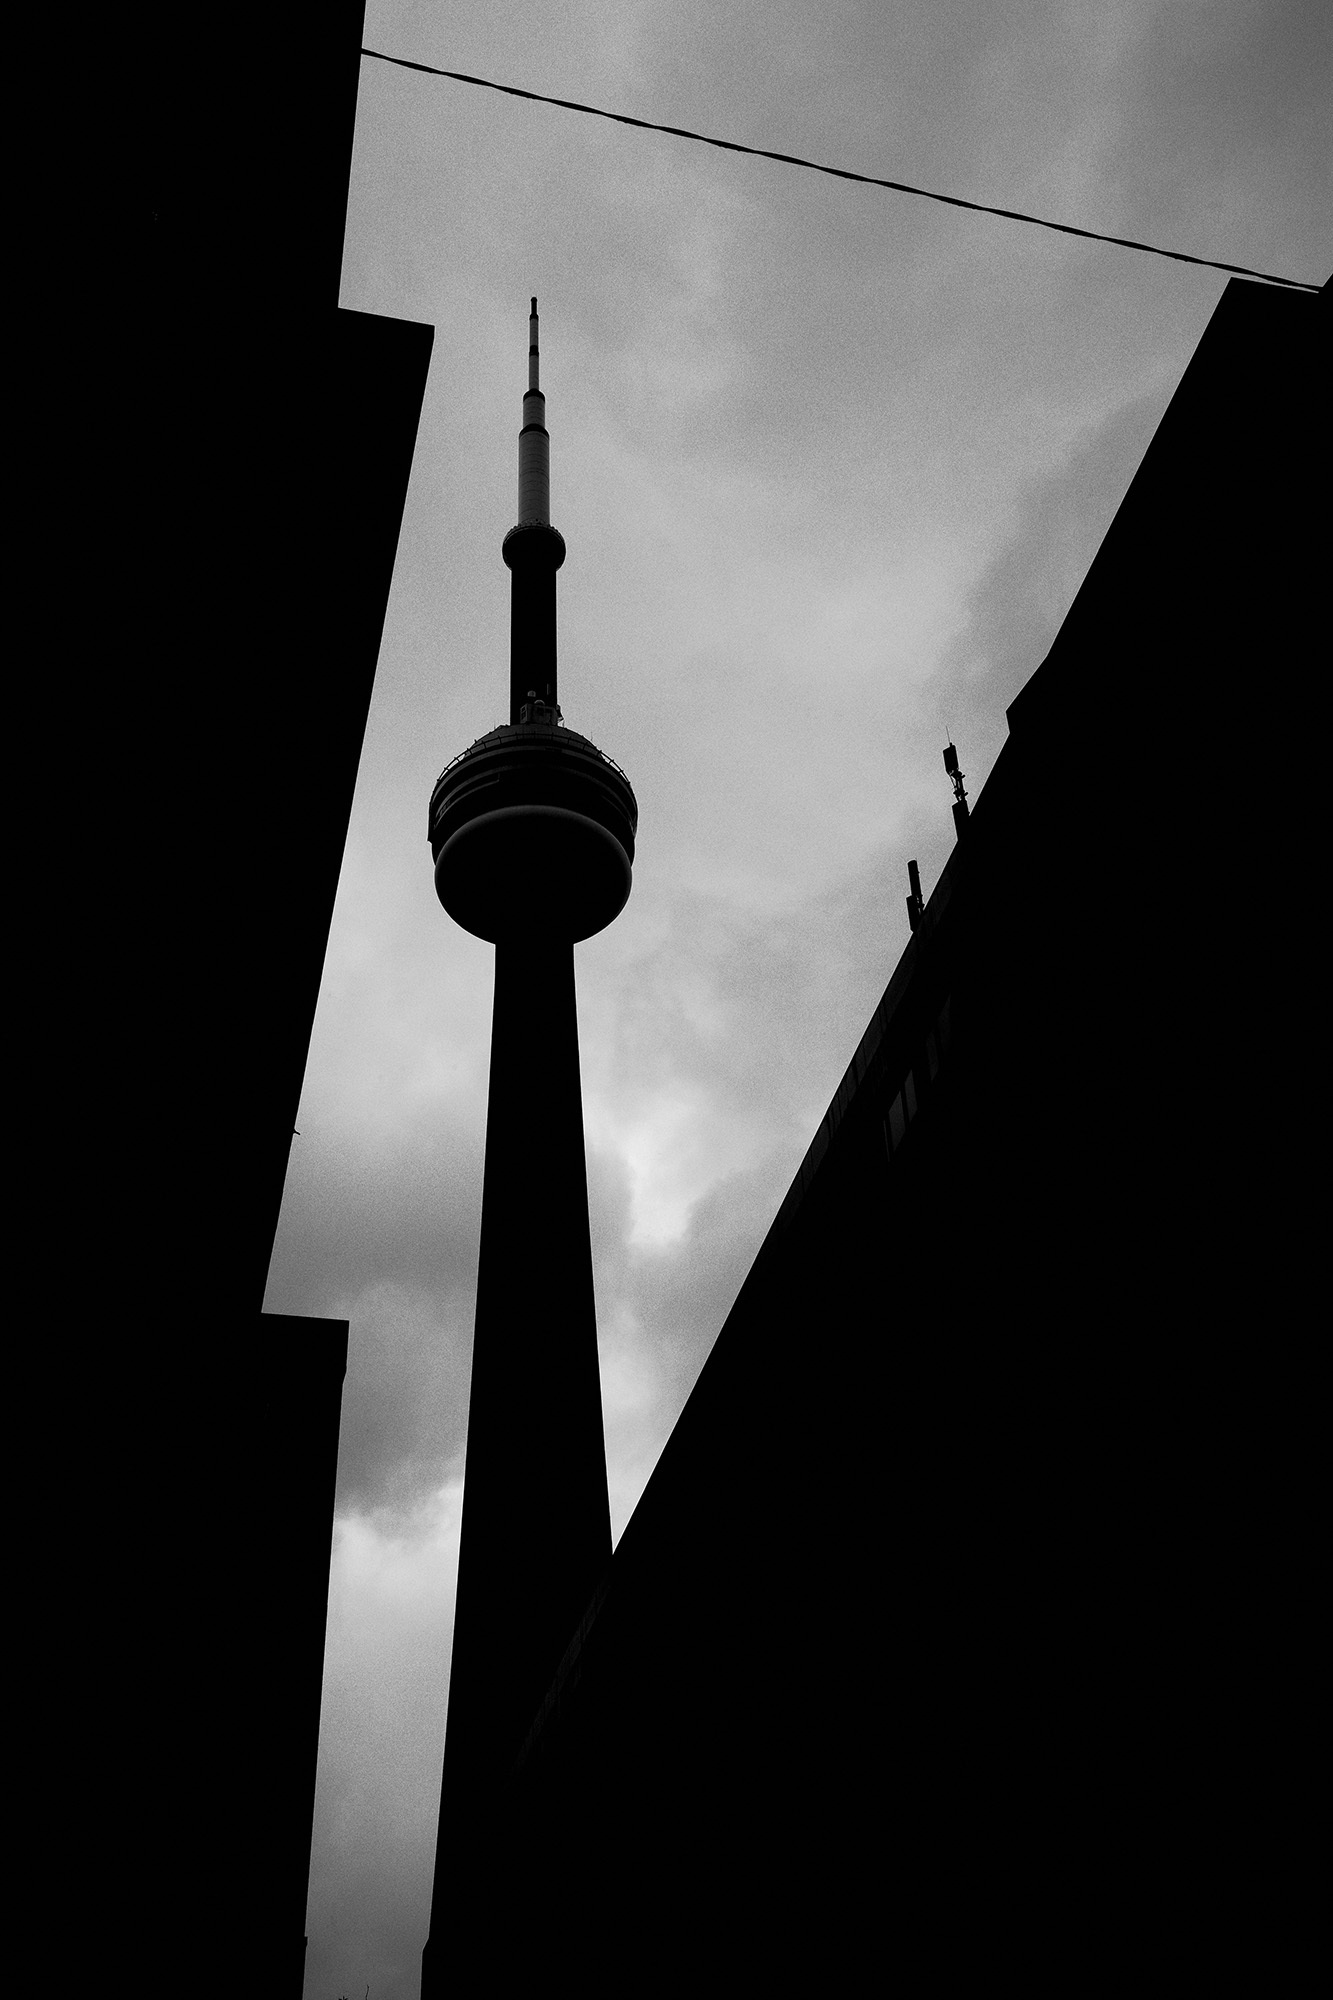 <p>A somewhat unorthodox take on Toronto's tallest tower.<br /></p>